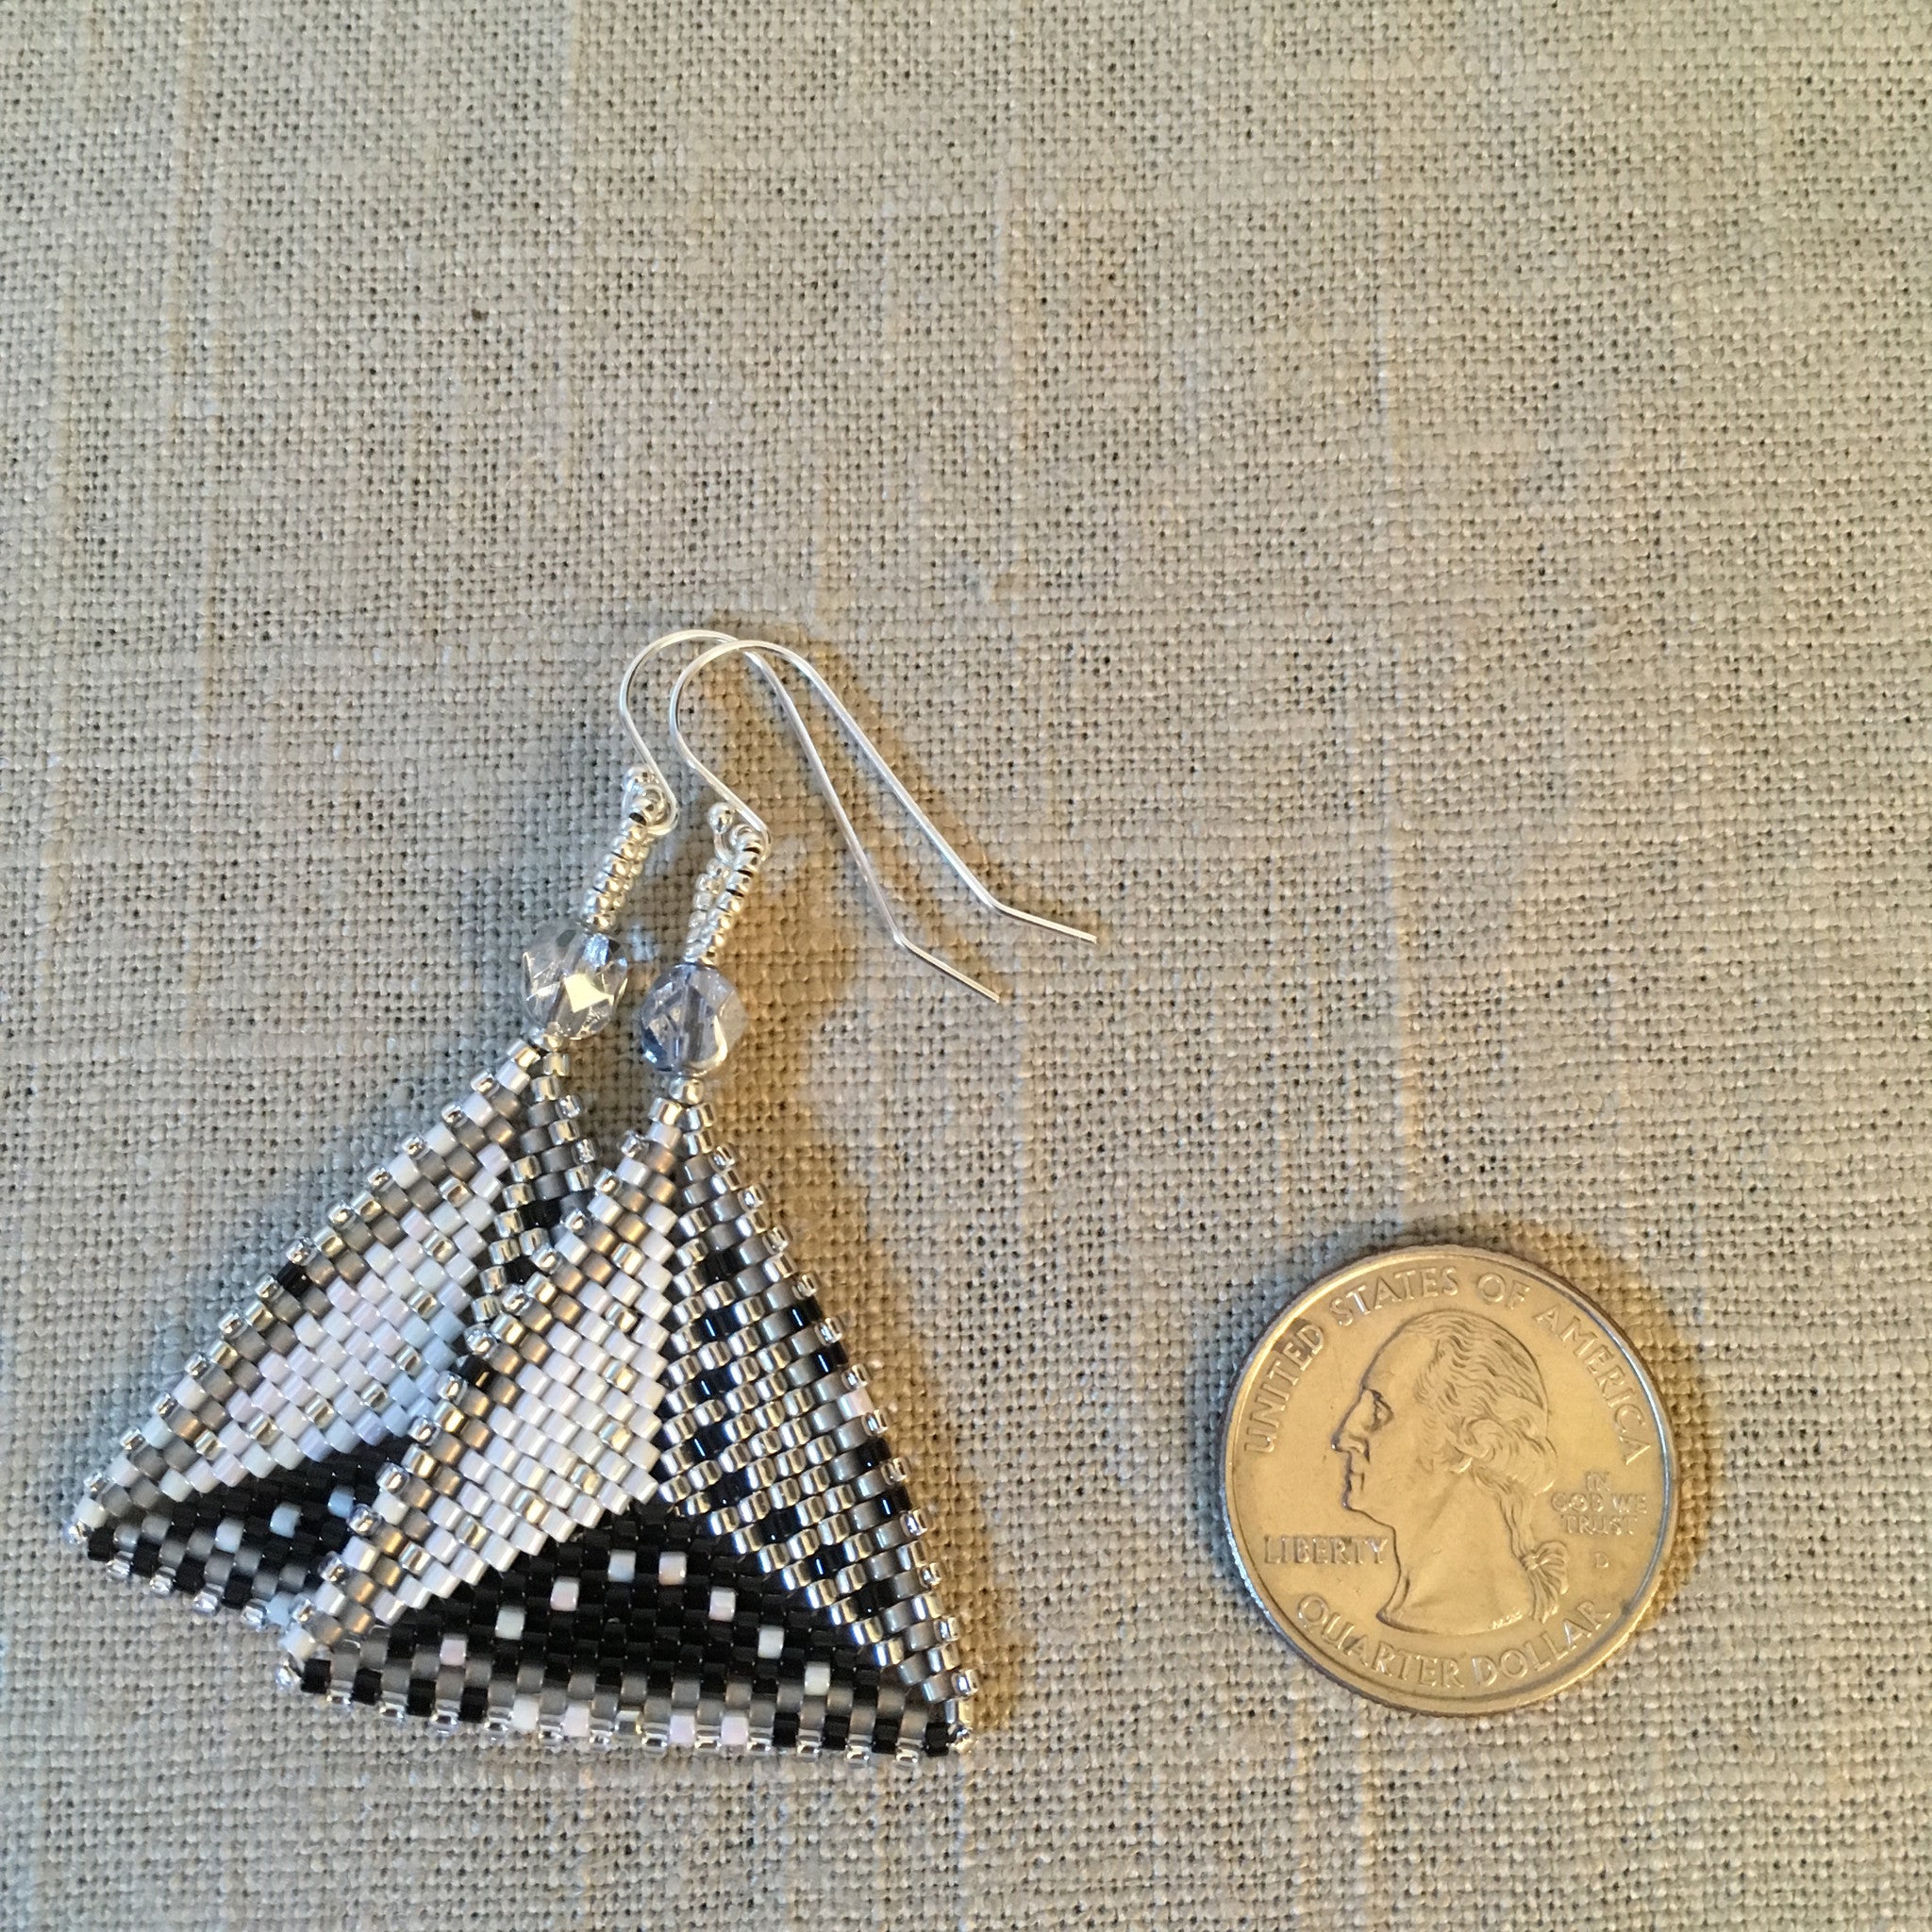 Black, Silver, White, and Grey Contemporary Triangle Earrings